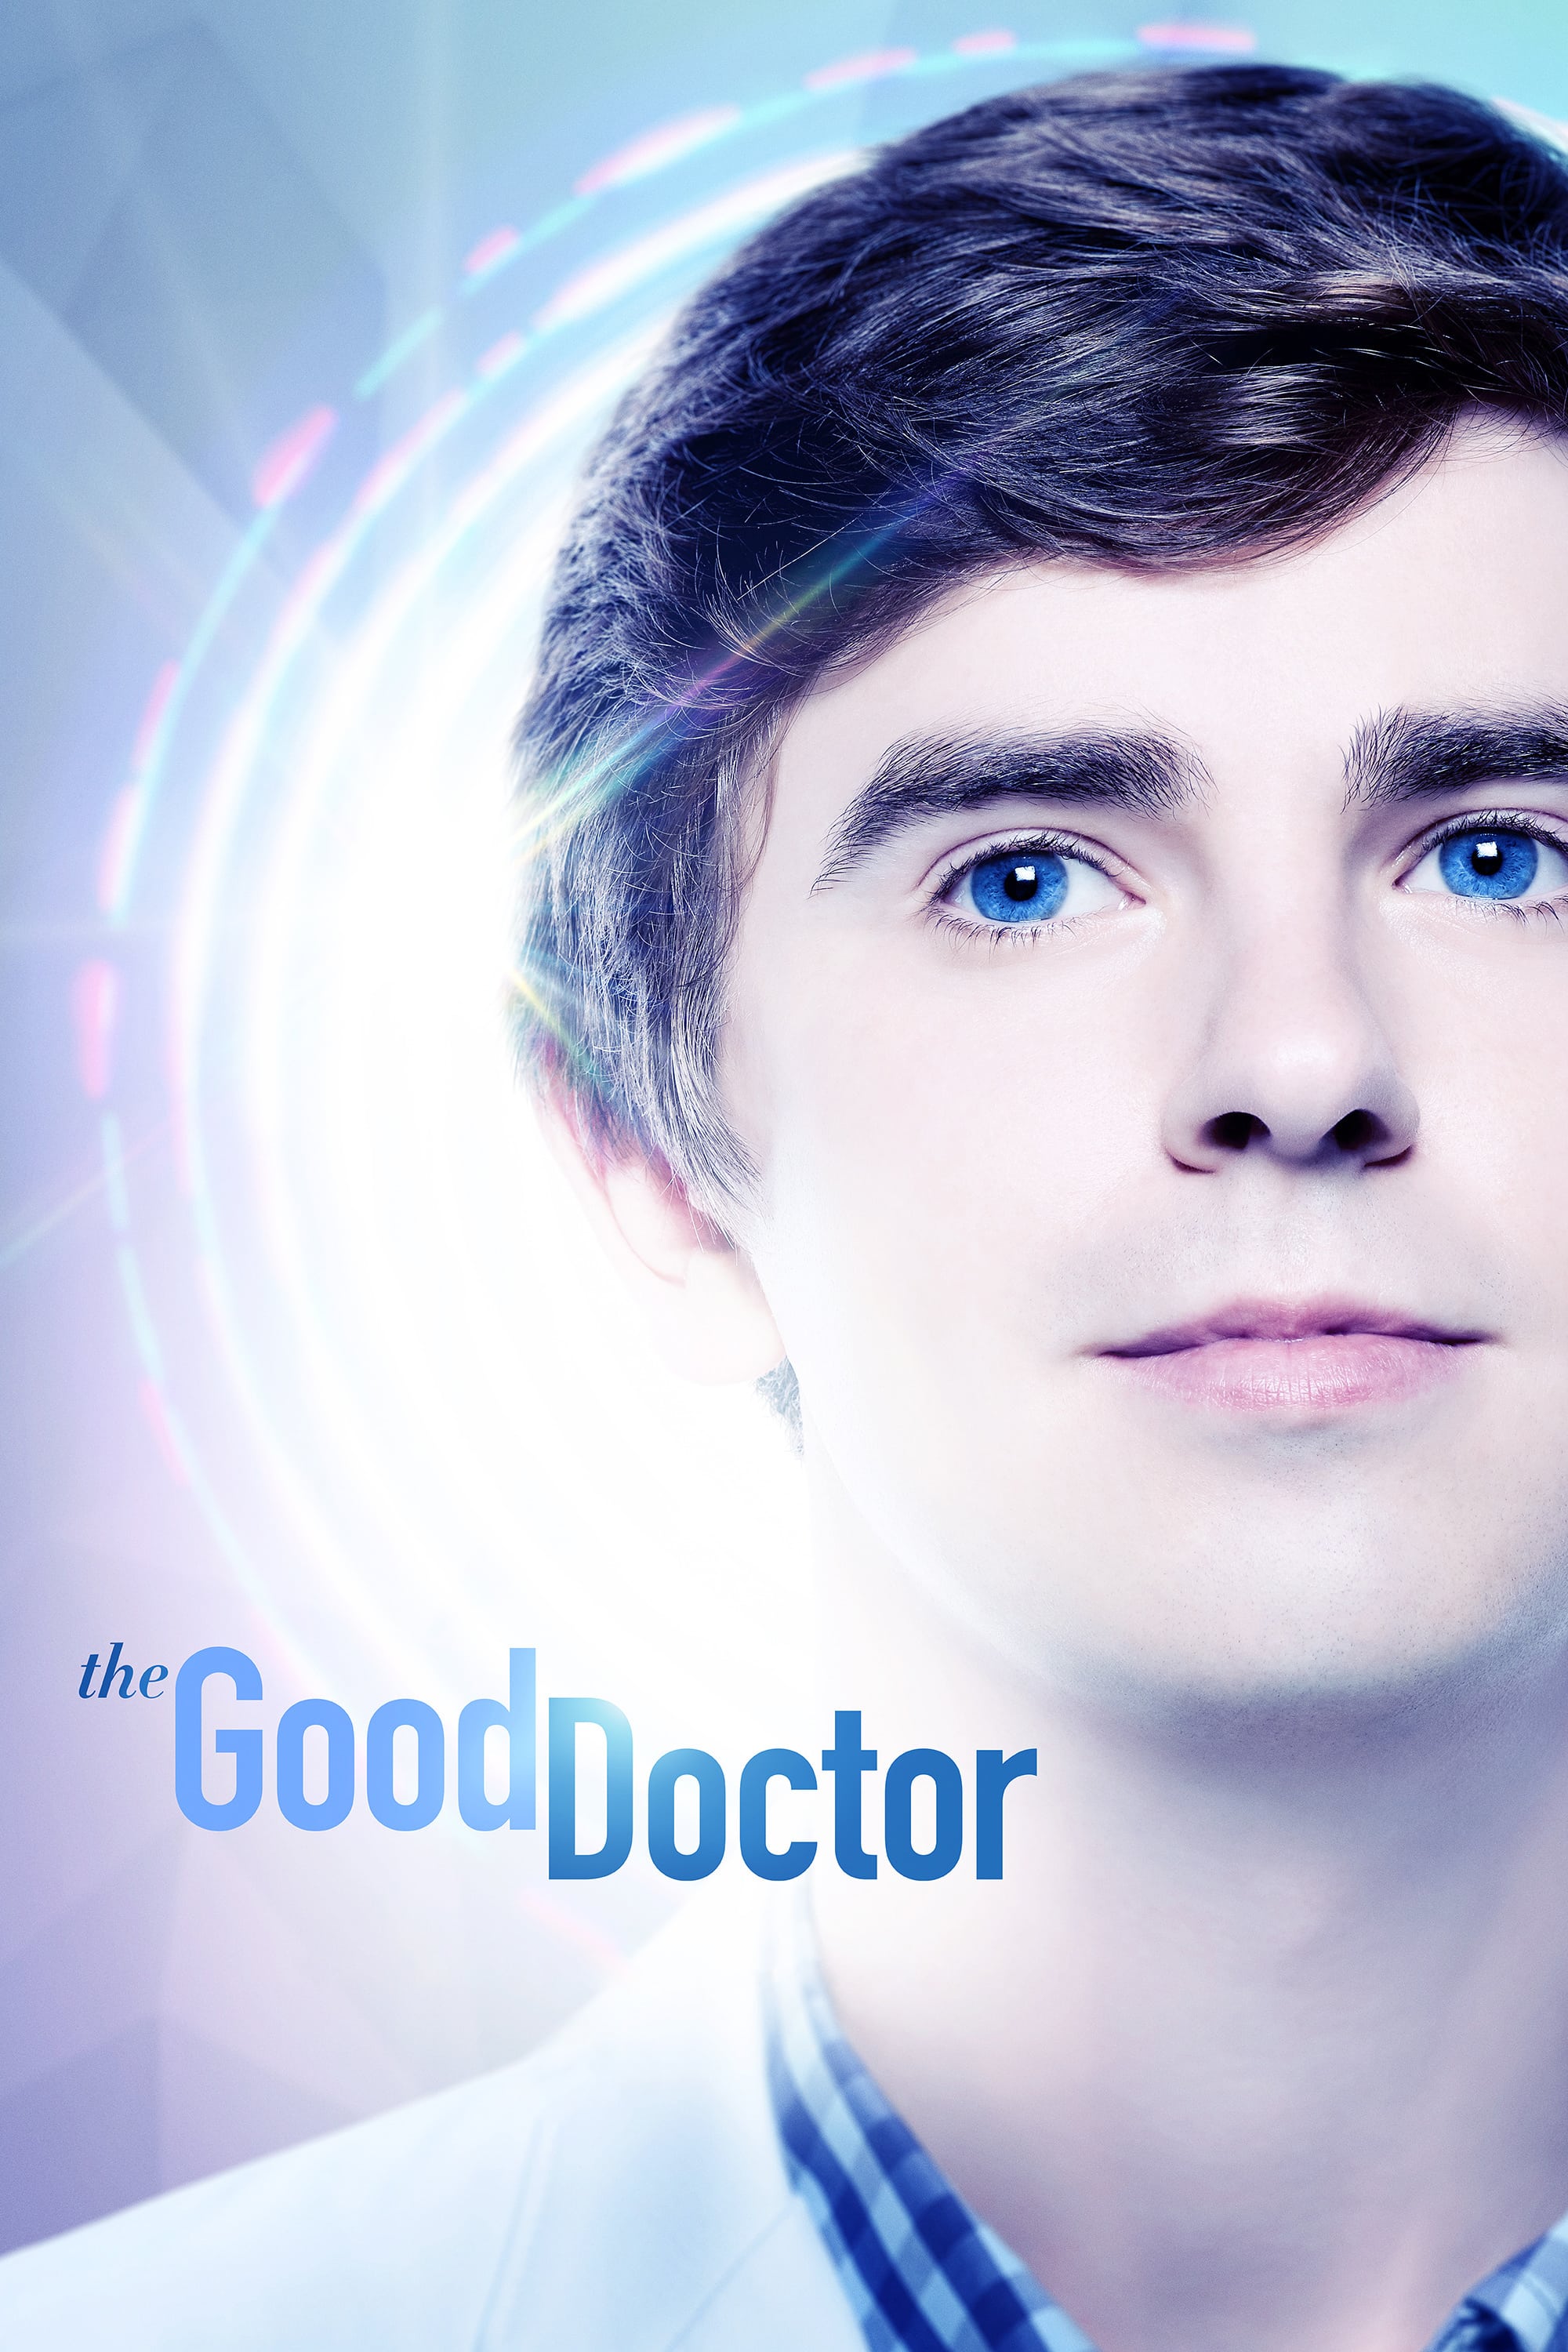 The Good Doctor rating